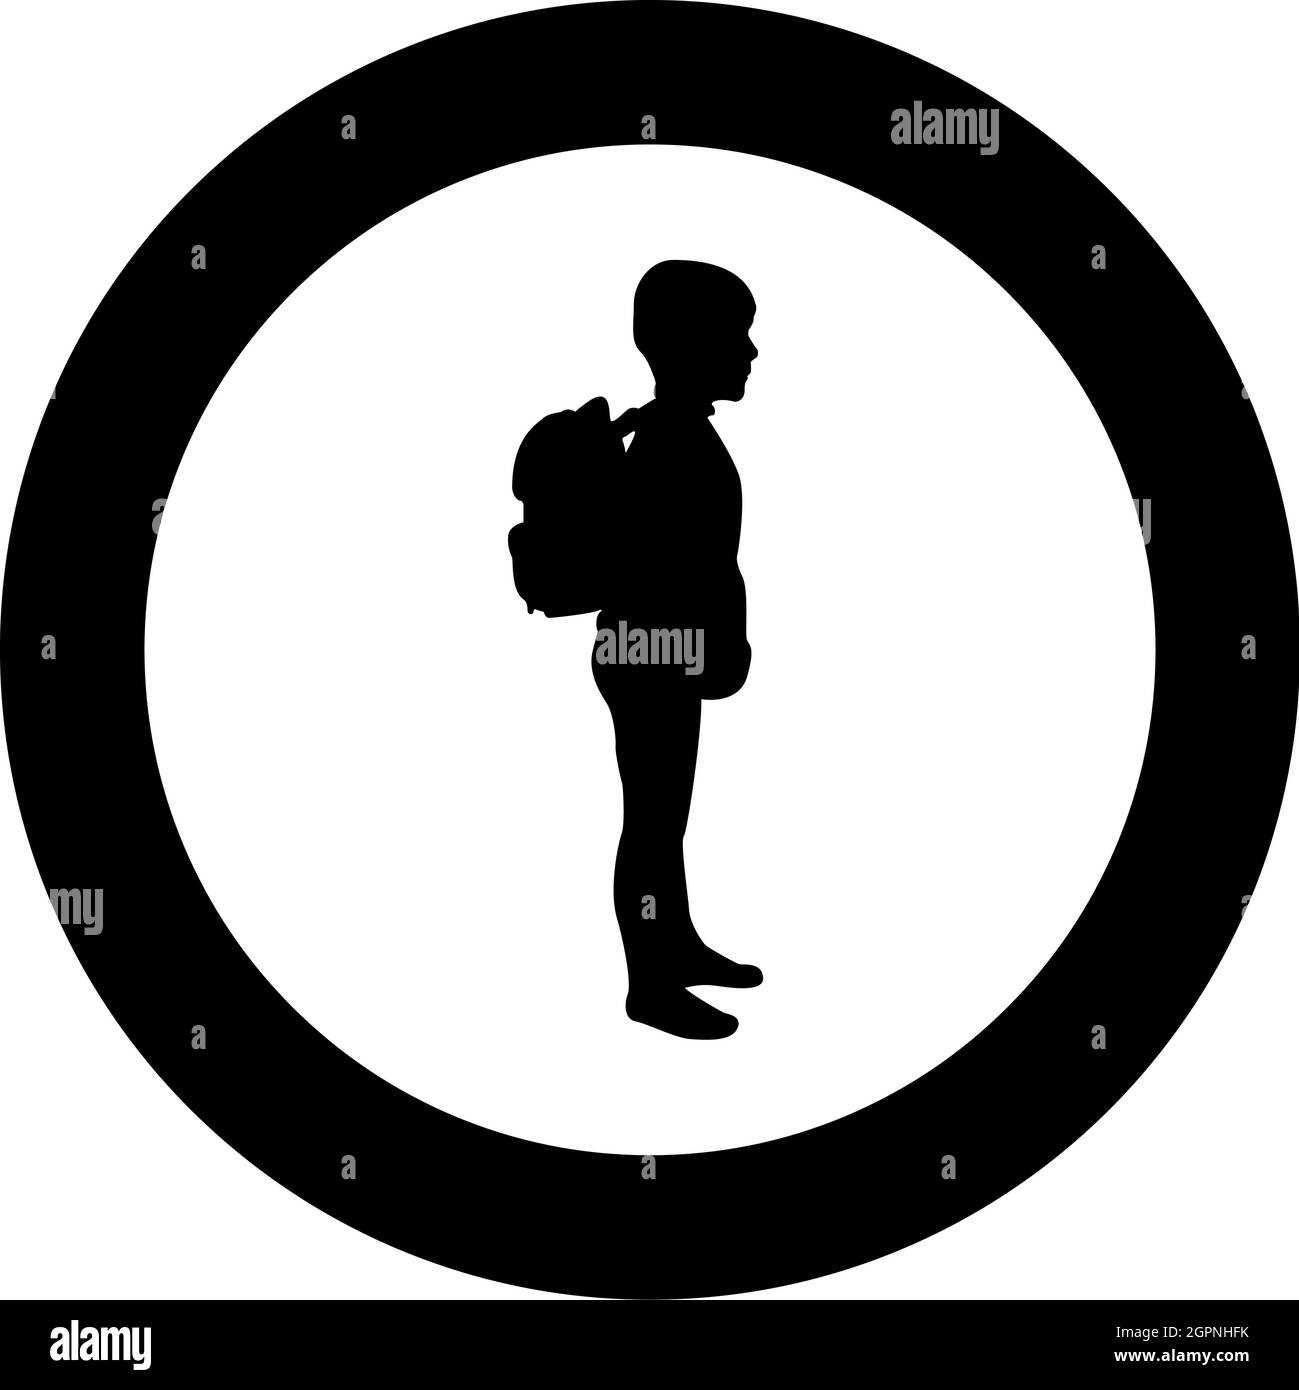 Schoolboy with backpack Pupil stand carrying on back Going to school concept Come back to school idea education Preschooler rucksack first September start lessons knapsack Side view silhouette in circle round black color vector illustration solid outline Stock Vector